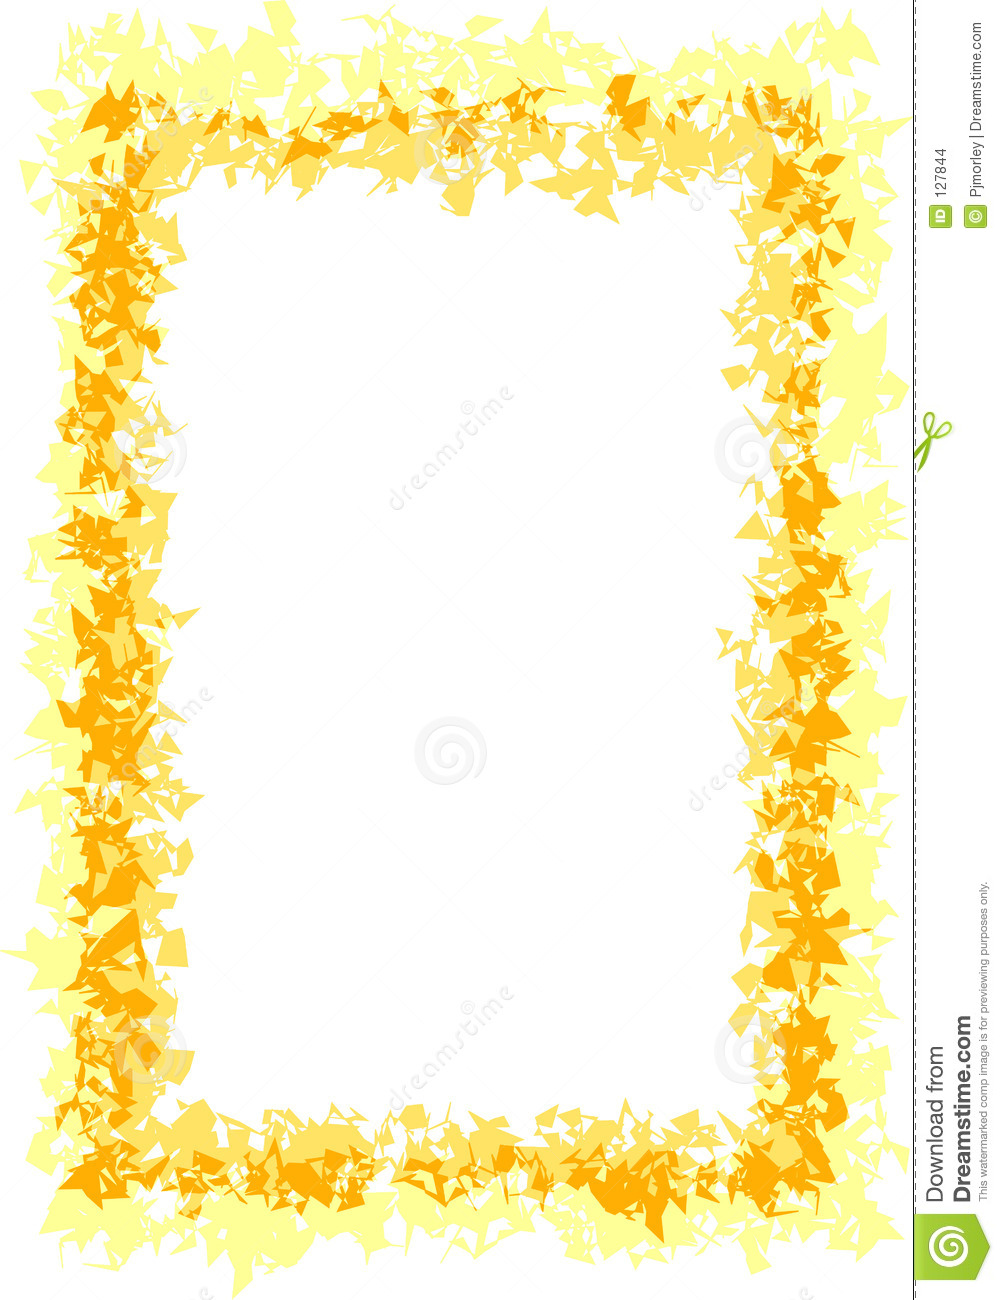 Gold Frame Border   Clipart Panda   Free Clipart Images